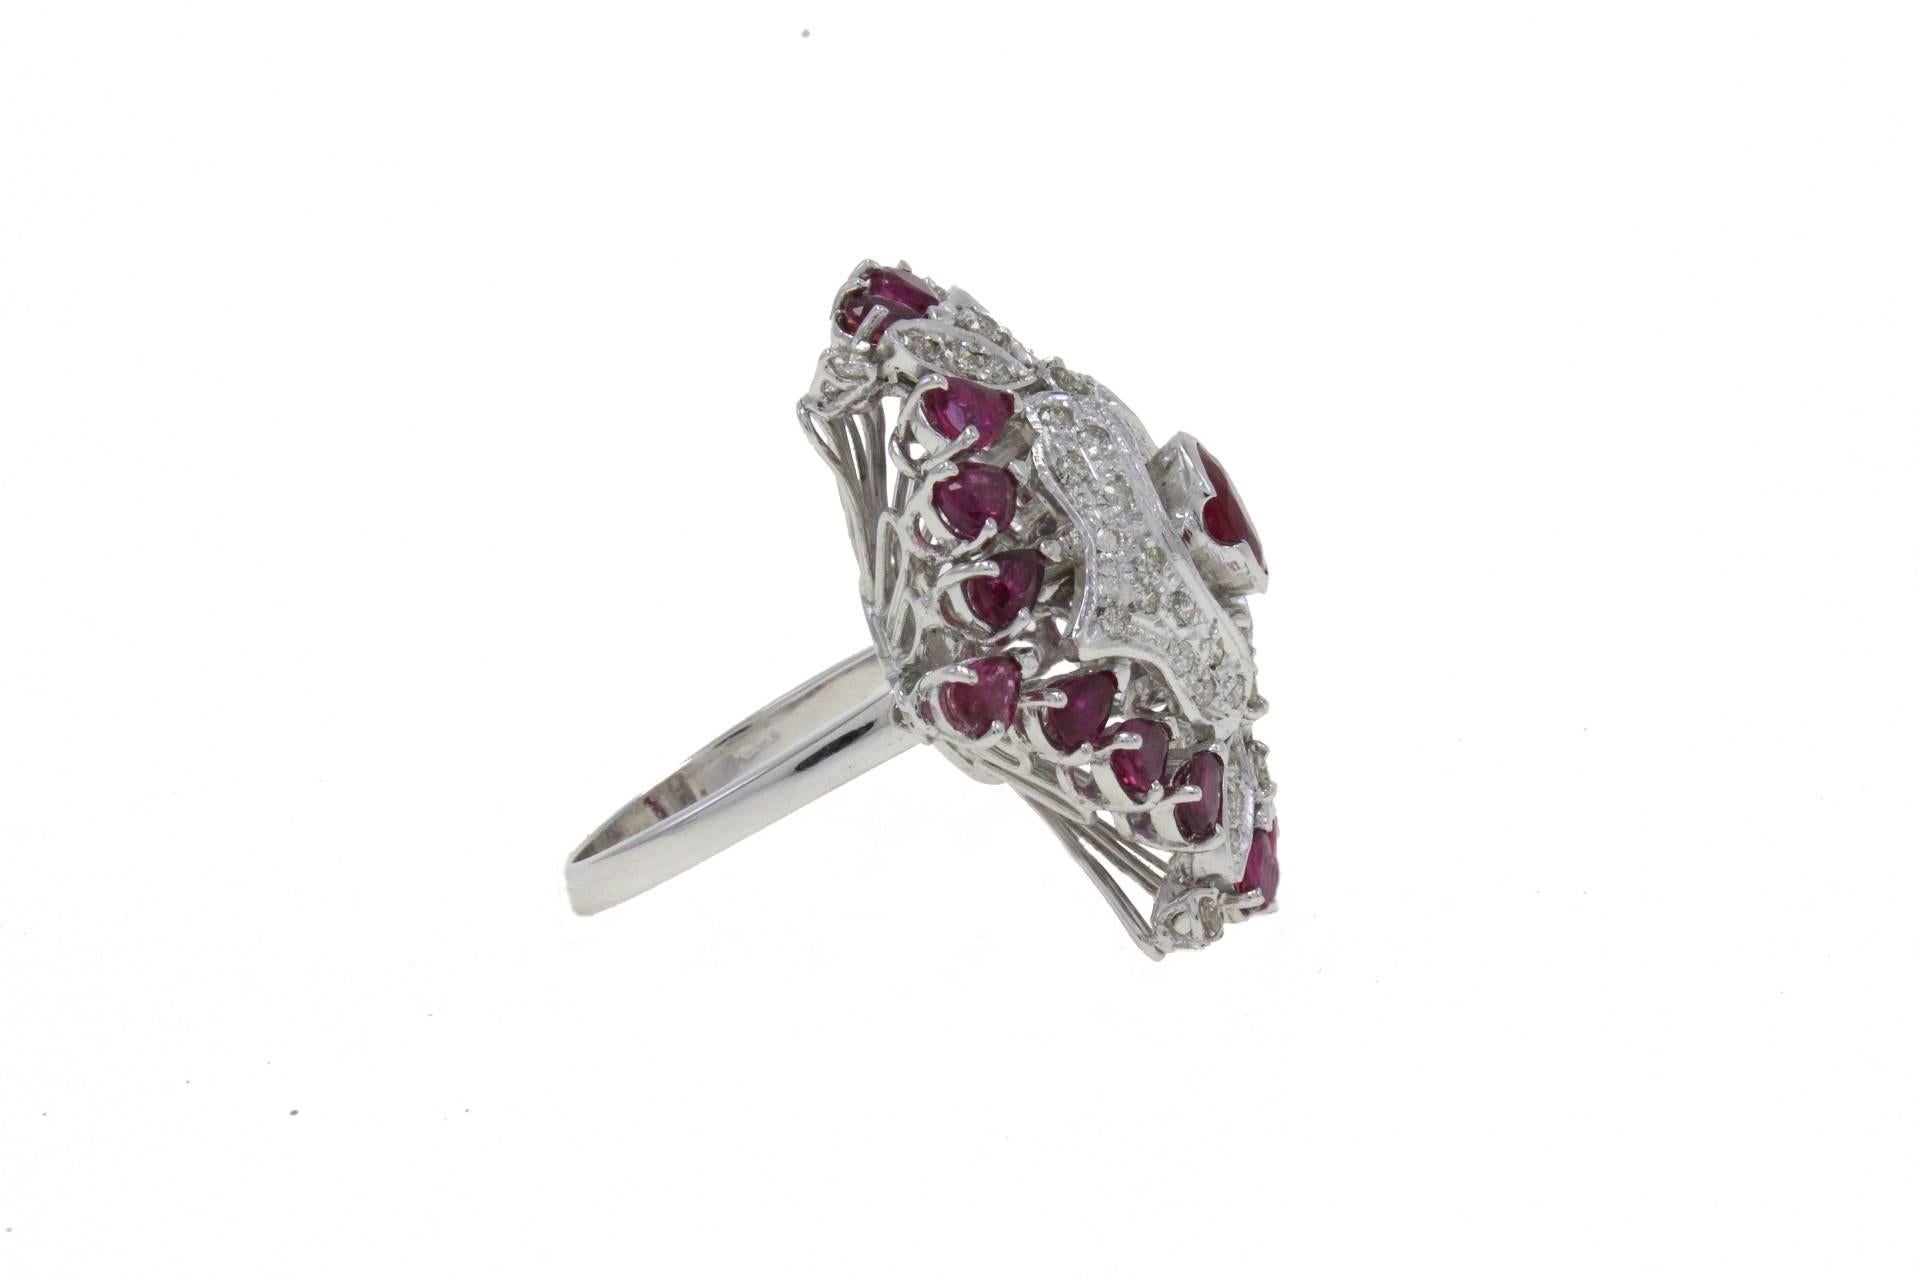 SHIPPING POLICY:
No additional costs will be added to this order.
Shipping costs will be totally covered by the seller (customs duties included).

Sparkling ring in 14kt white gold embellished with a central ruby surrounded by diamonds and a crown